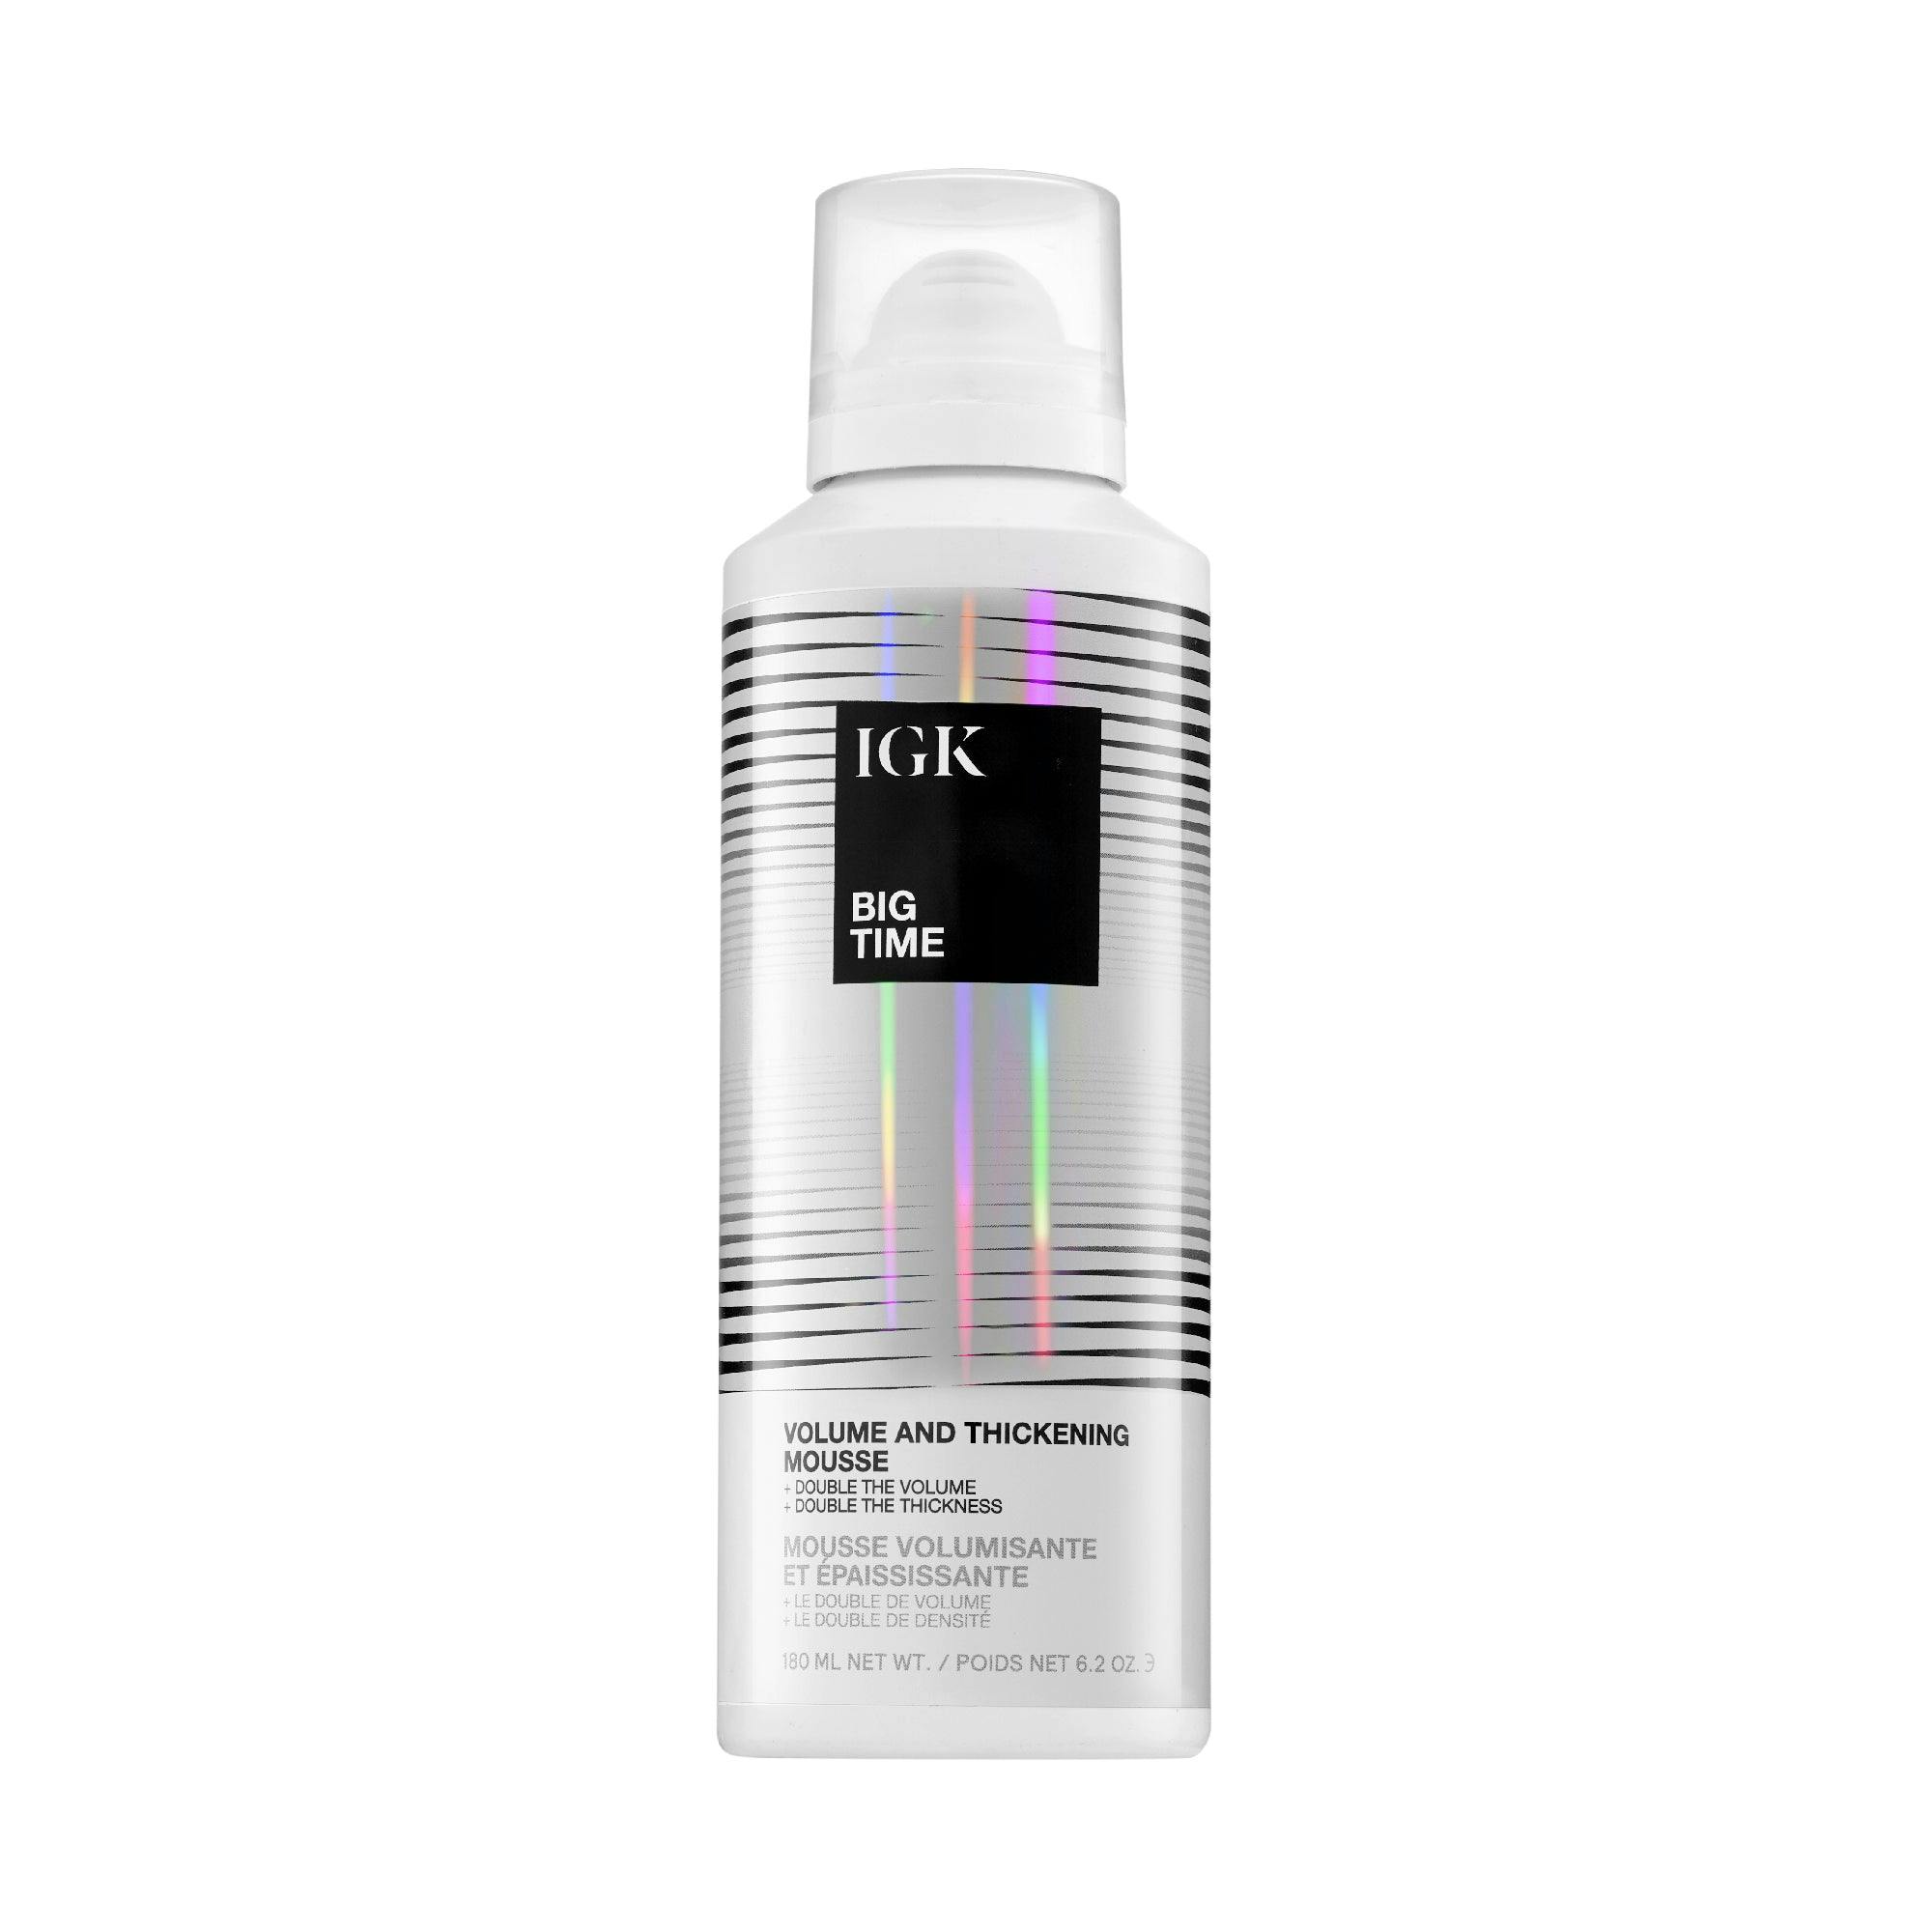 IGK BIG TIME Volume and Thickening Mousse 180ml